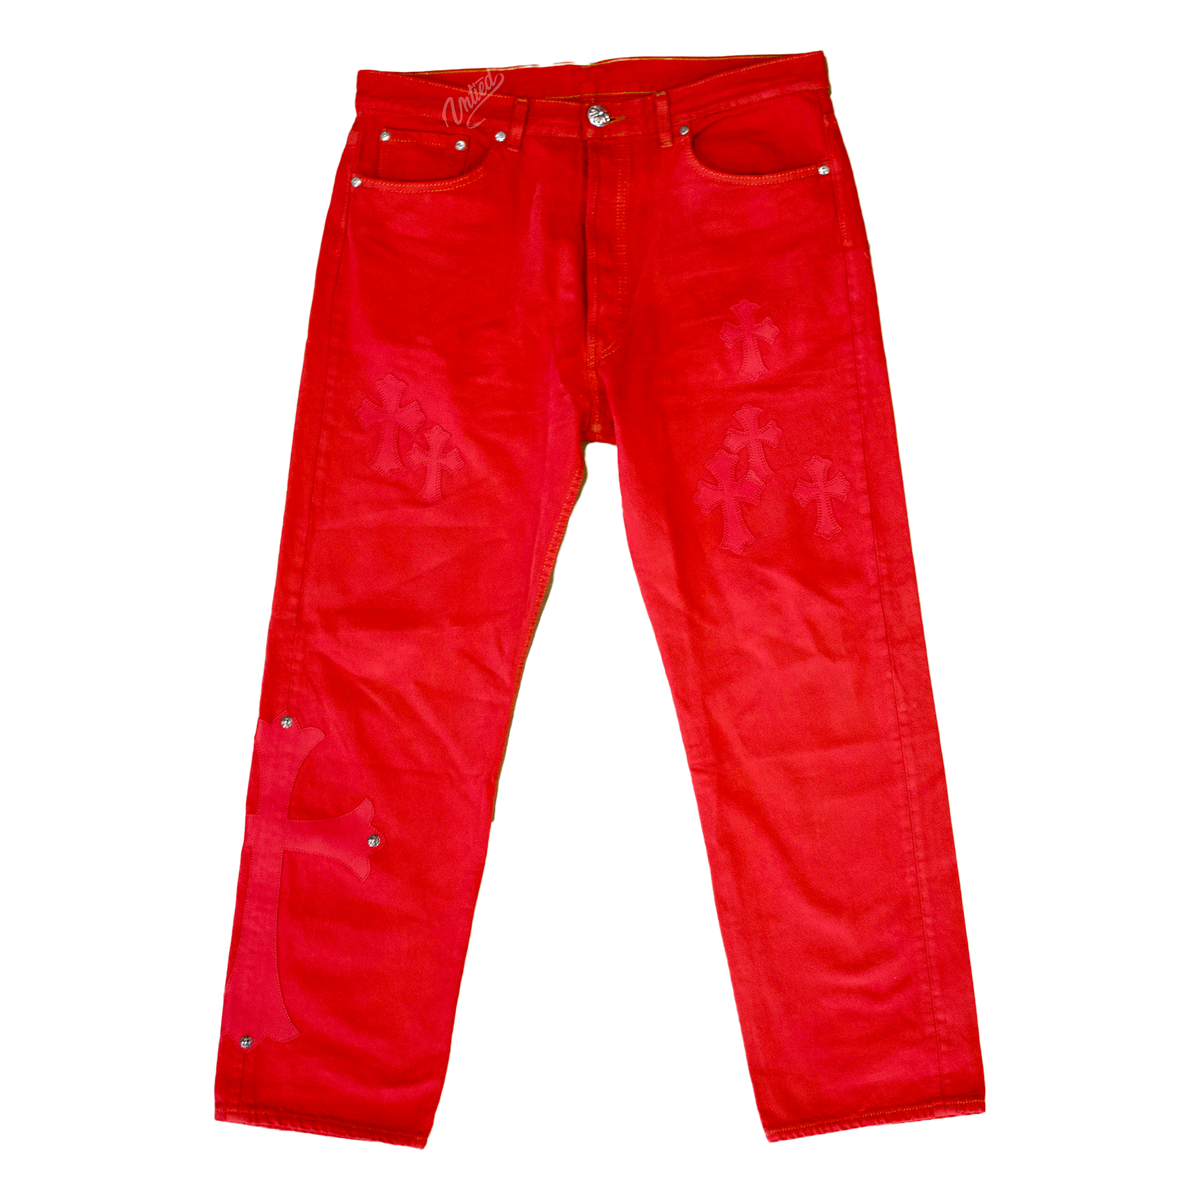 Chrome Hearts Red Denim Pants "Red Crosses"